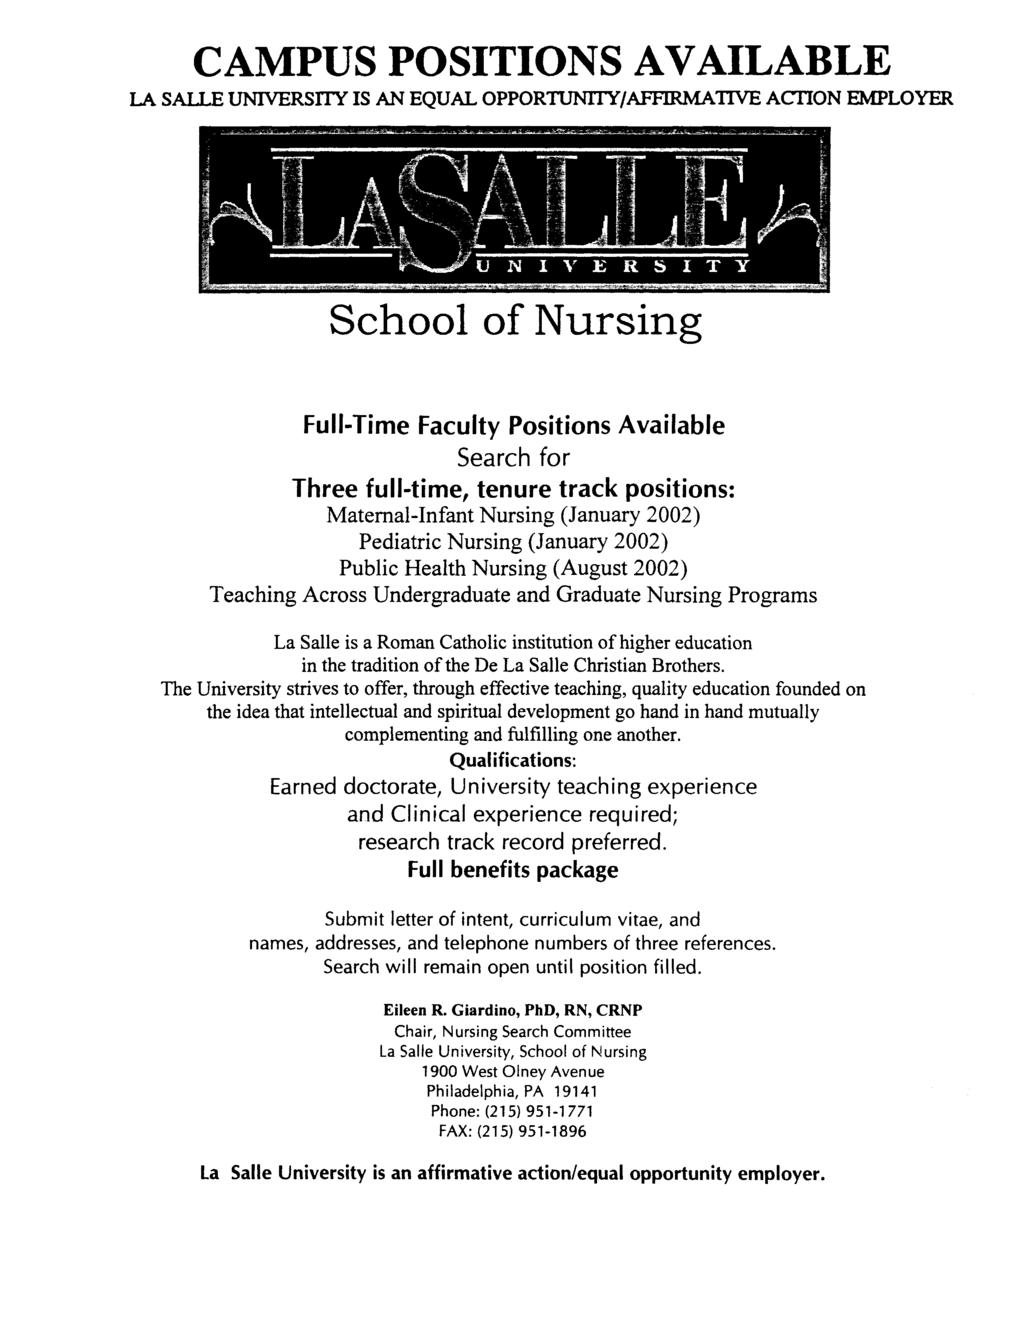 CAMPUS POSITIONS AVAILABLE LA SALLE UNIVERSITY IS AN EQUAL OPPORTUNITY/AFFIRMATIVE ACTION EMPLOYER School of Nursing Full-Time Faculty Positions Available Search for Three full-time, tenure track